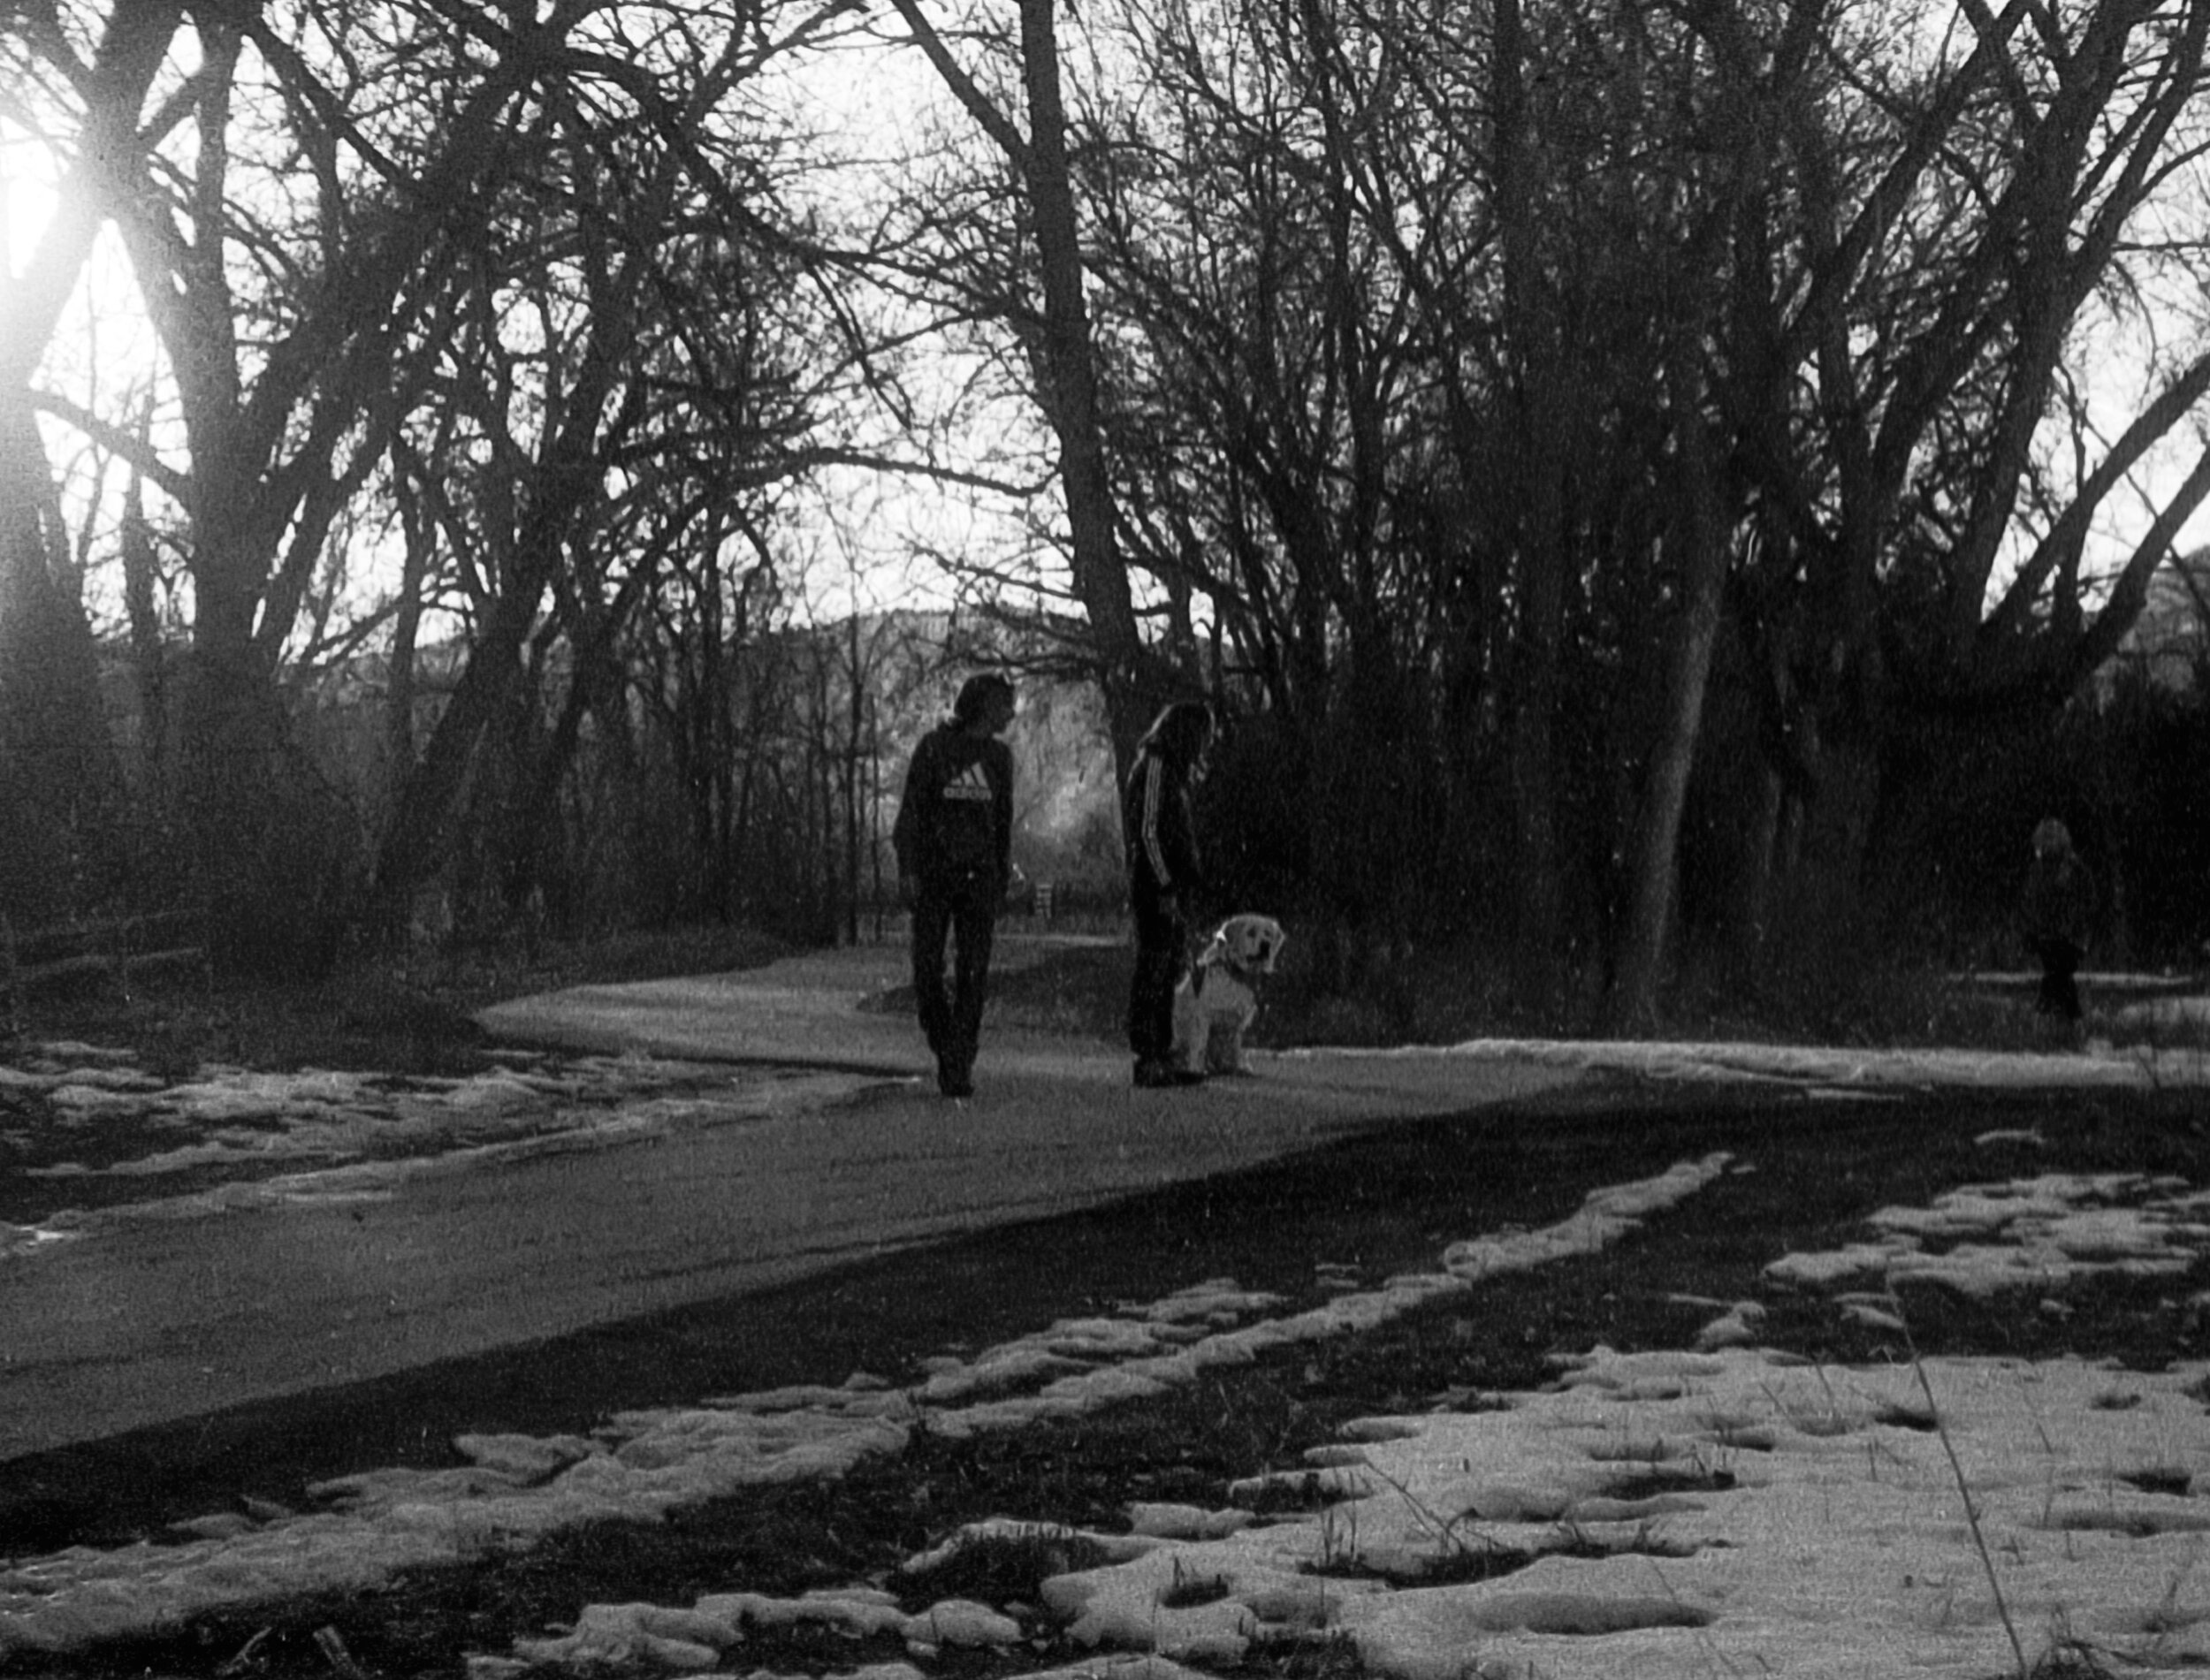 Quiet couple and their pup, walking before dusk